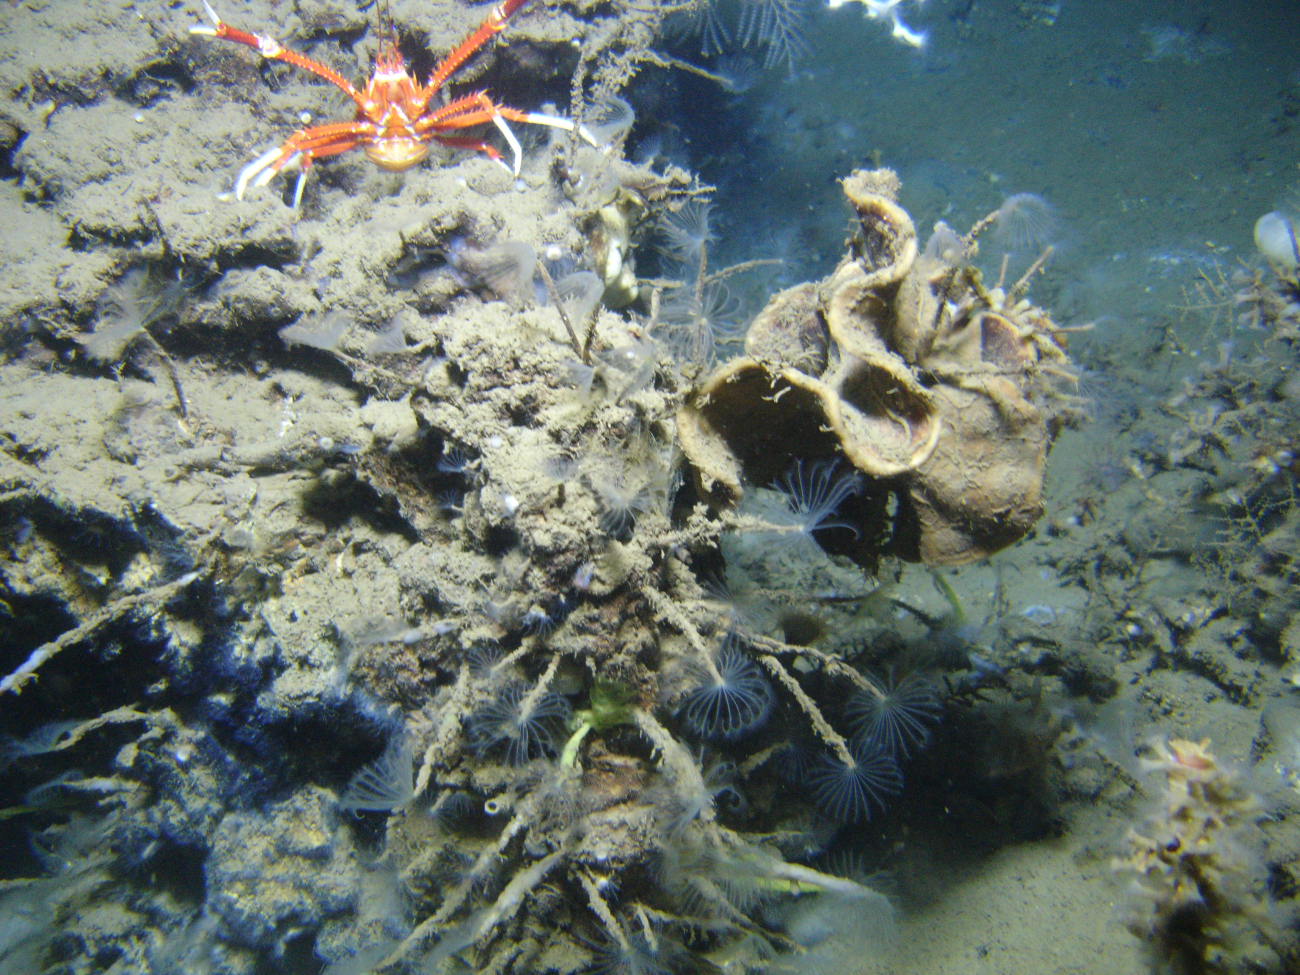 An outcrop in a cold seep area with a large orange and white squat lobster andnumerous tube worms with feeding tentacles extended